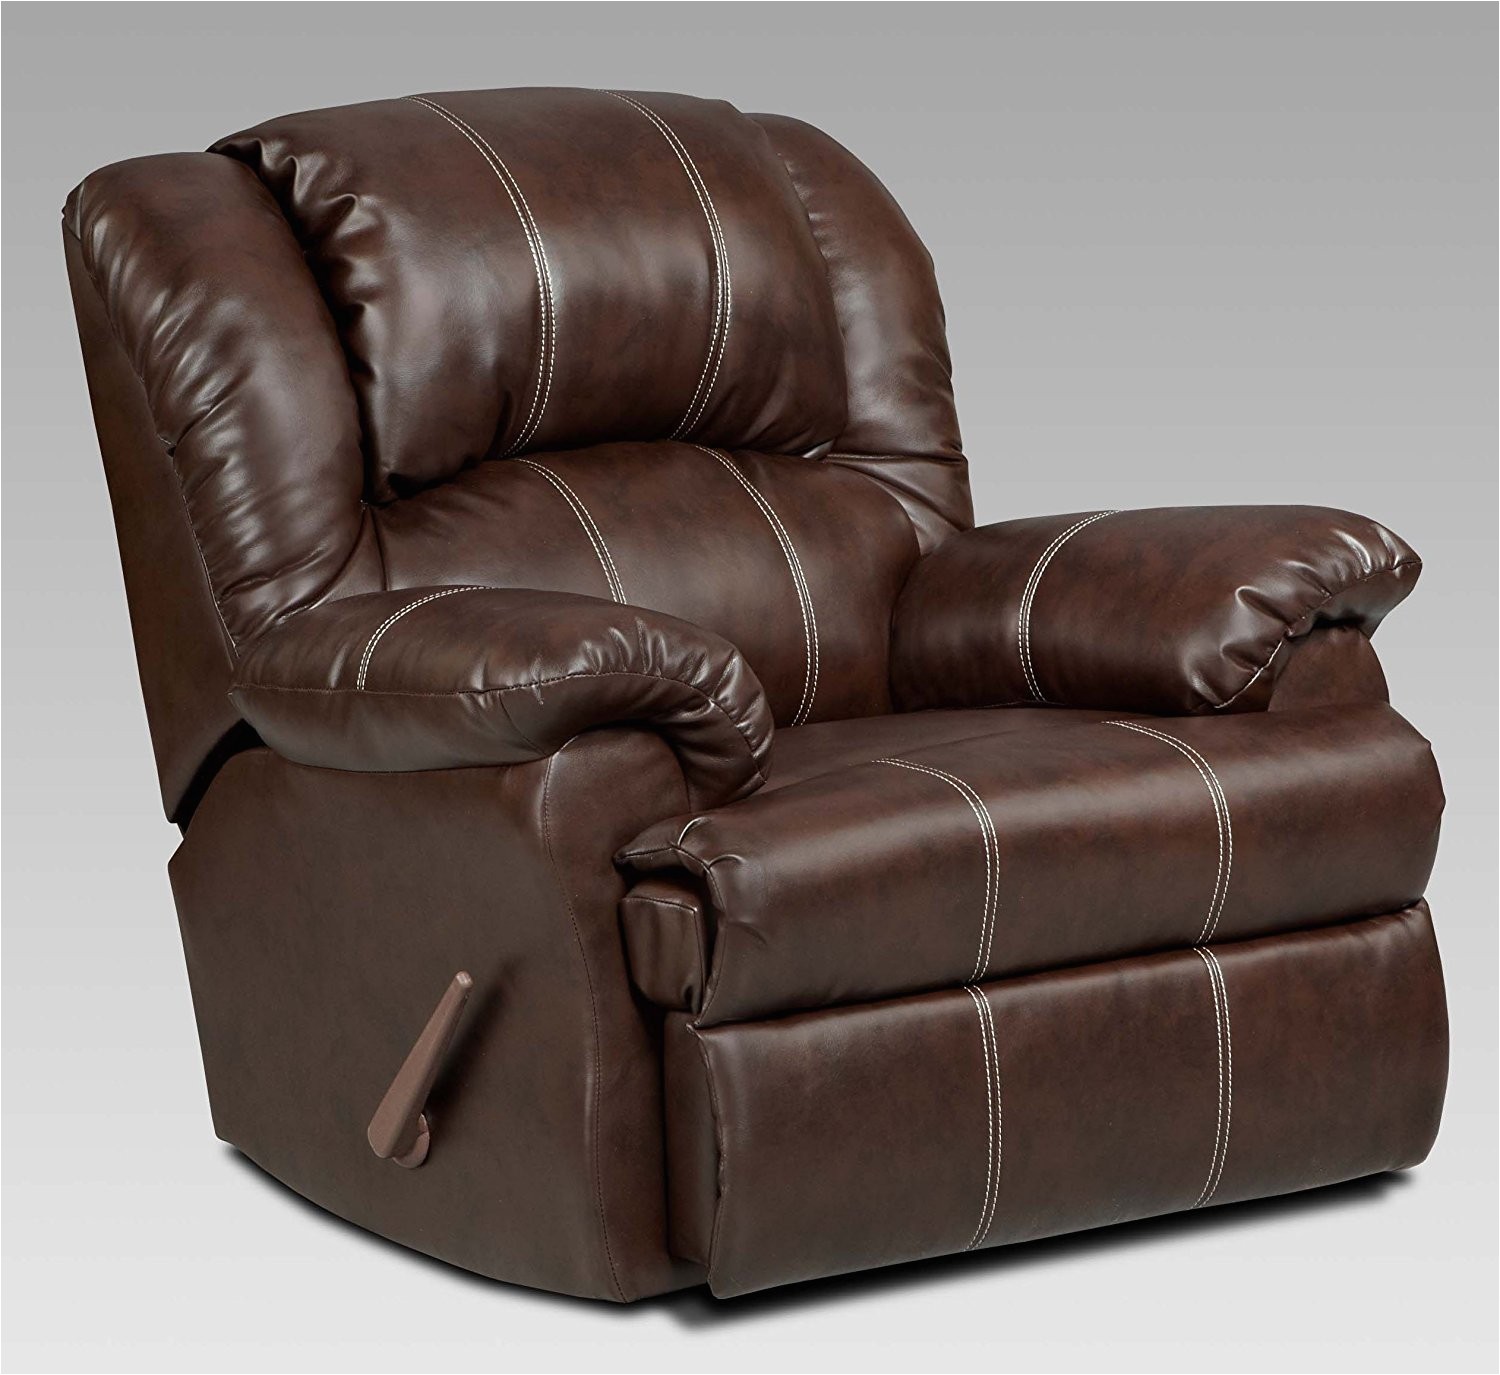 Best Recliner for Big and Tall Man Best Recliner for Big and Tall Man that Offers Maximum